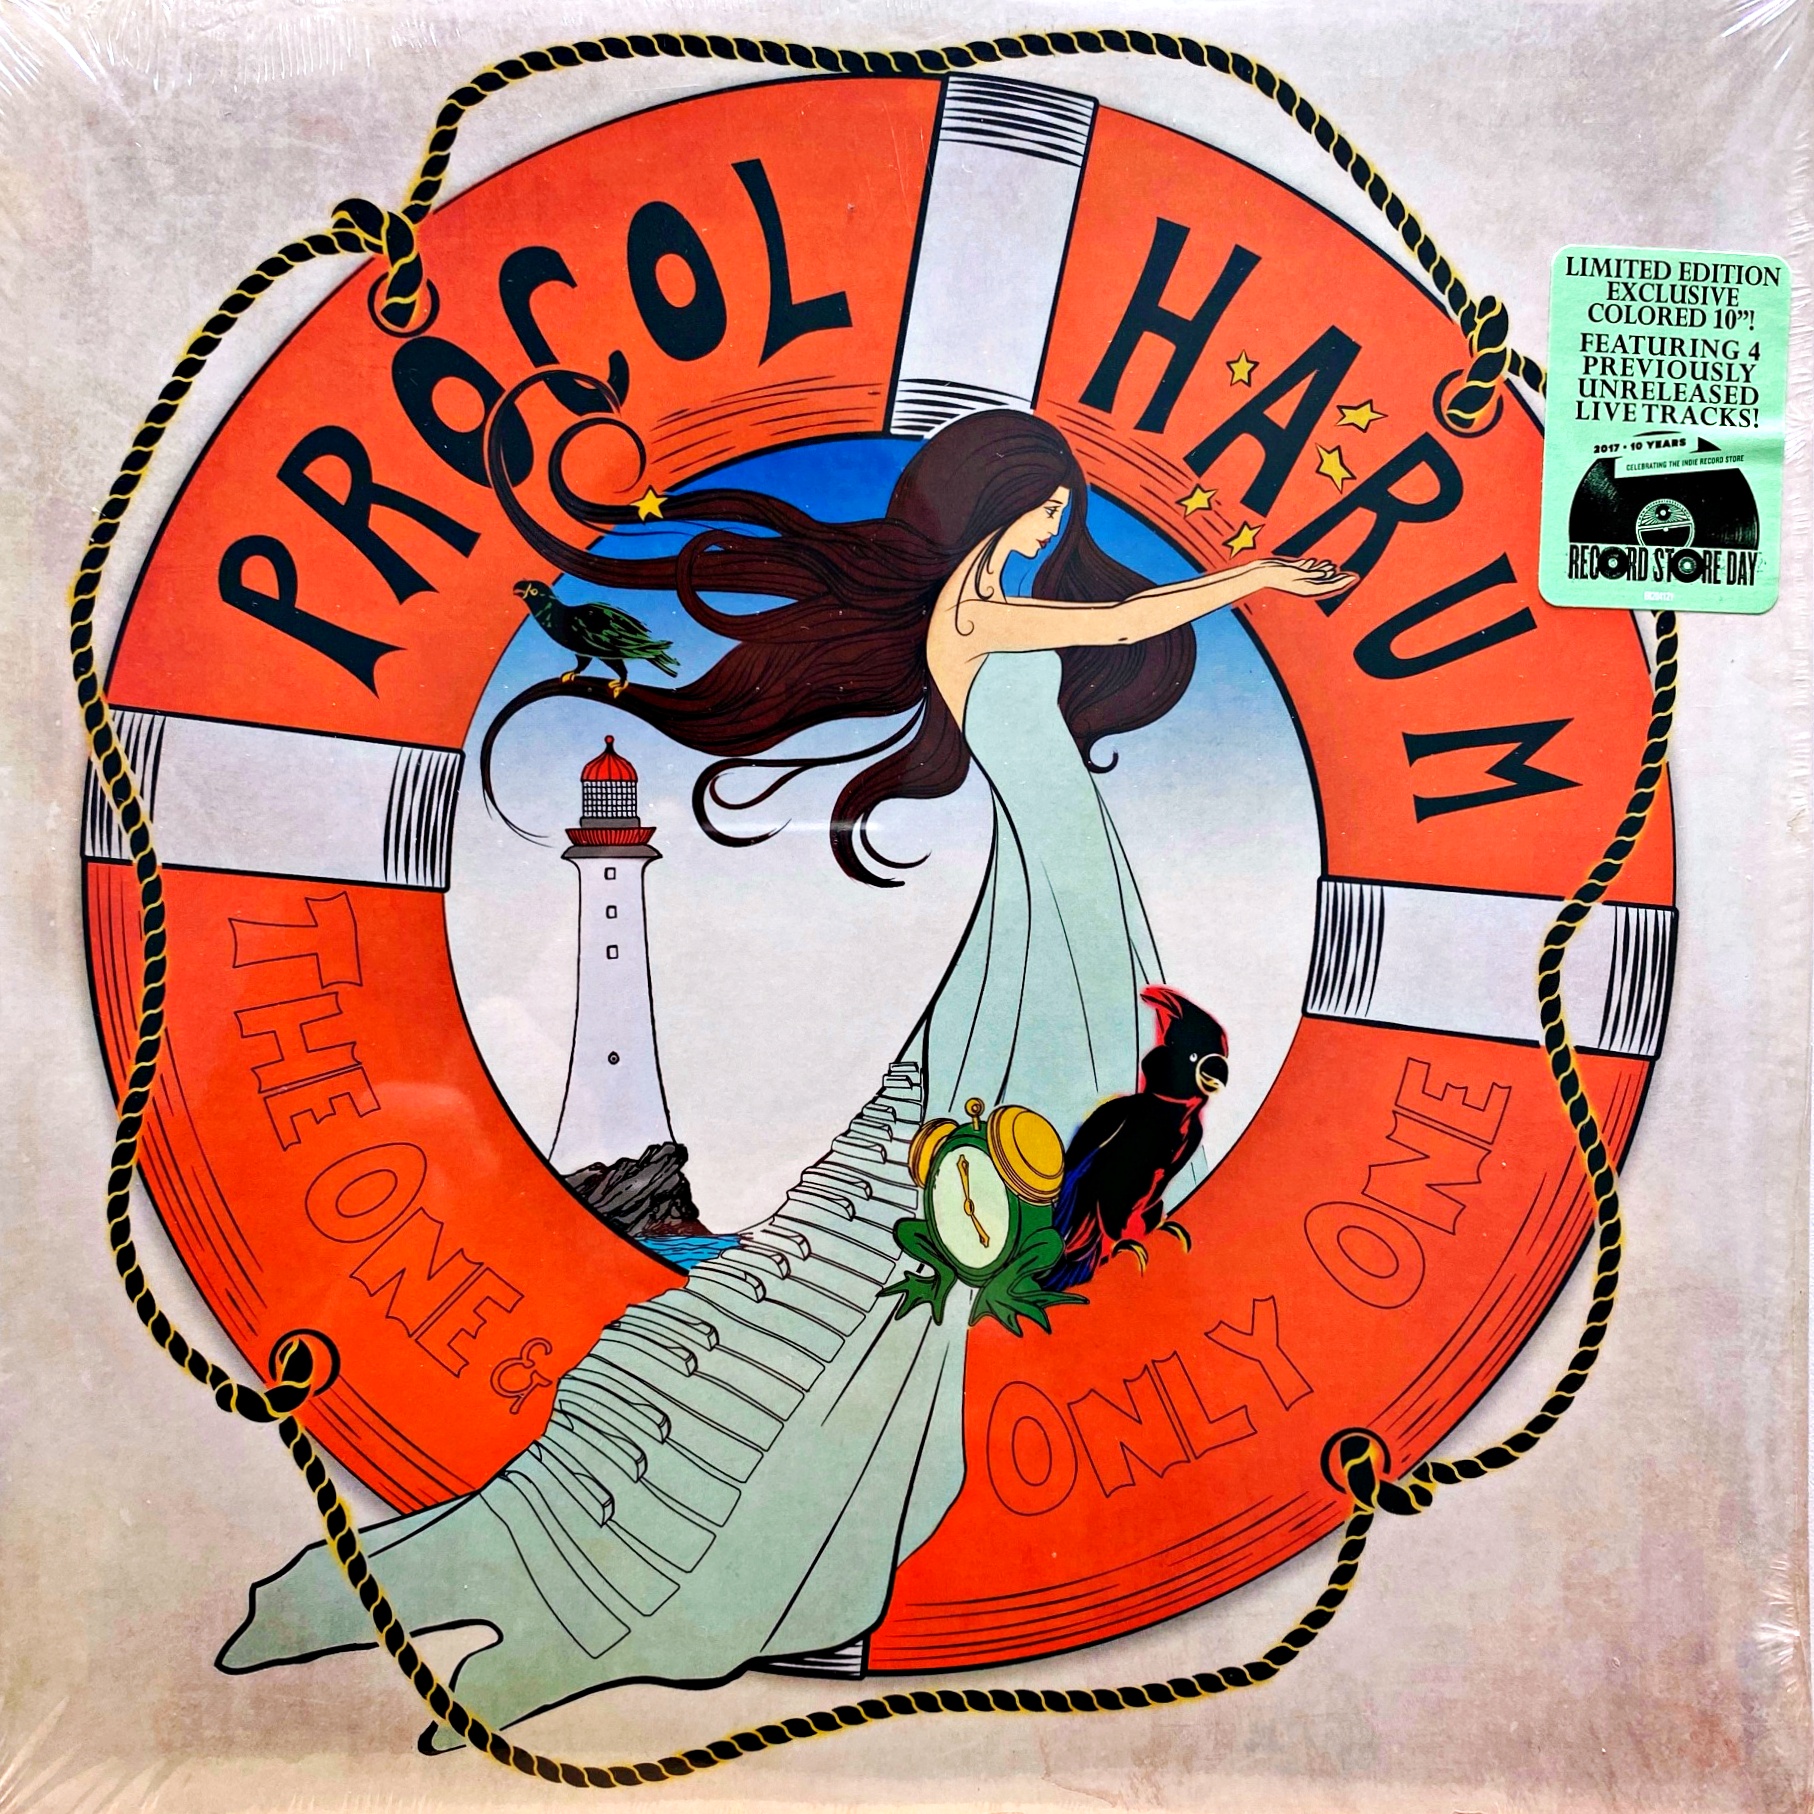 10" Procol Harum – The One & Only One